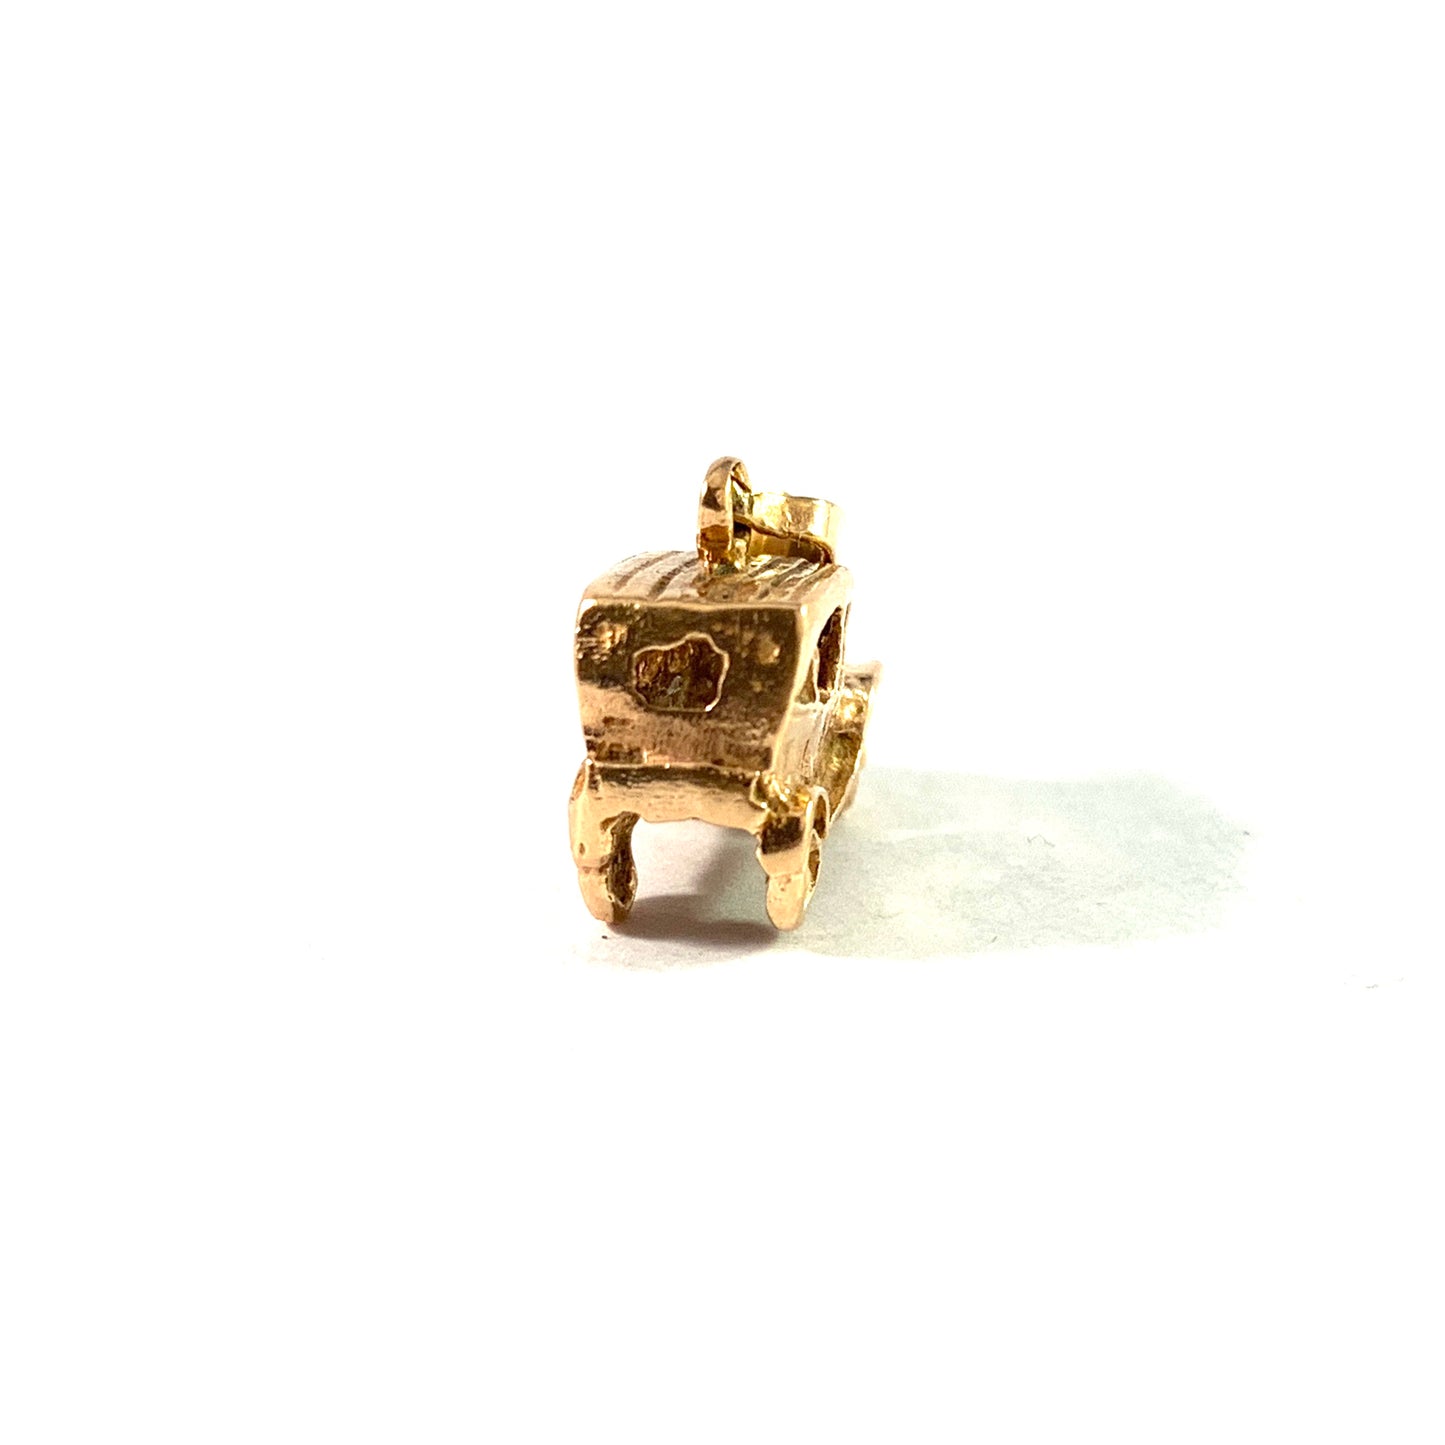 Vintage Mid Century 18k Gold Car T-Ford? Charm.